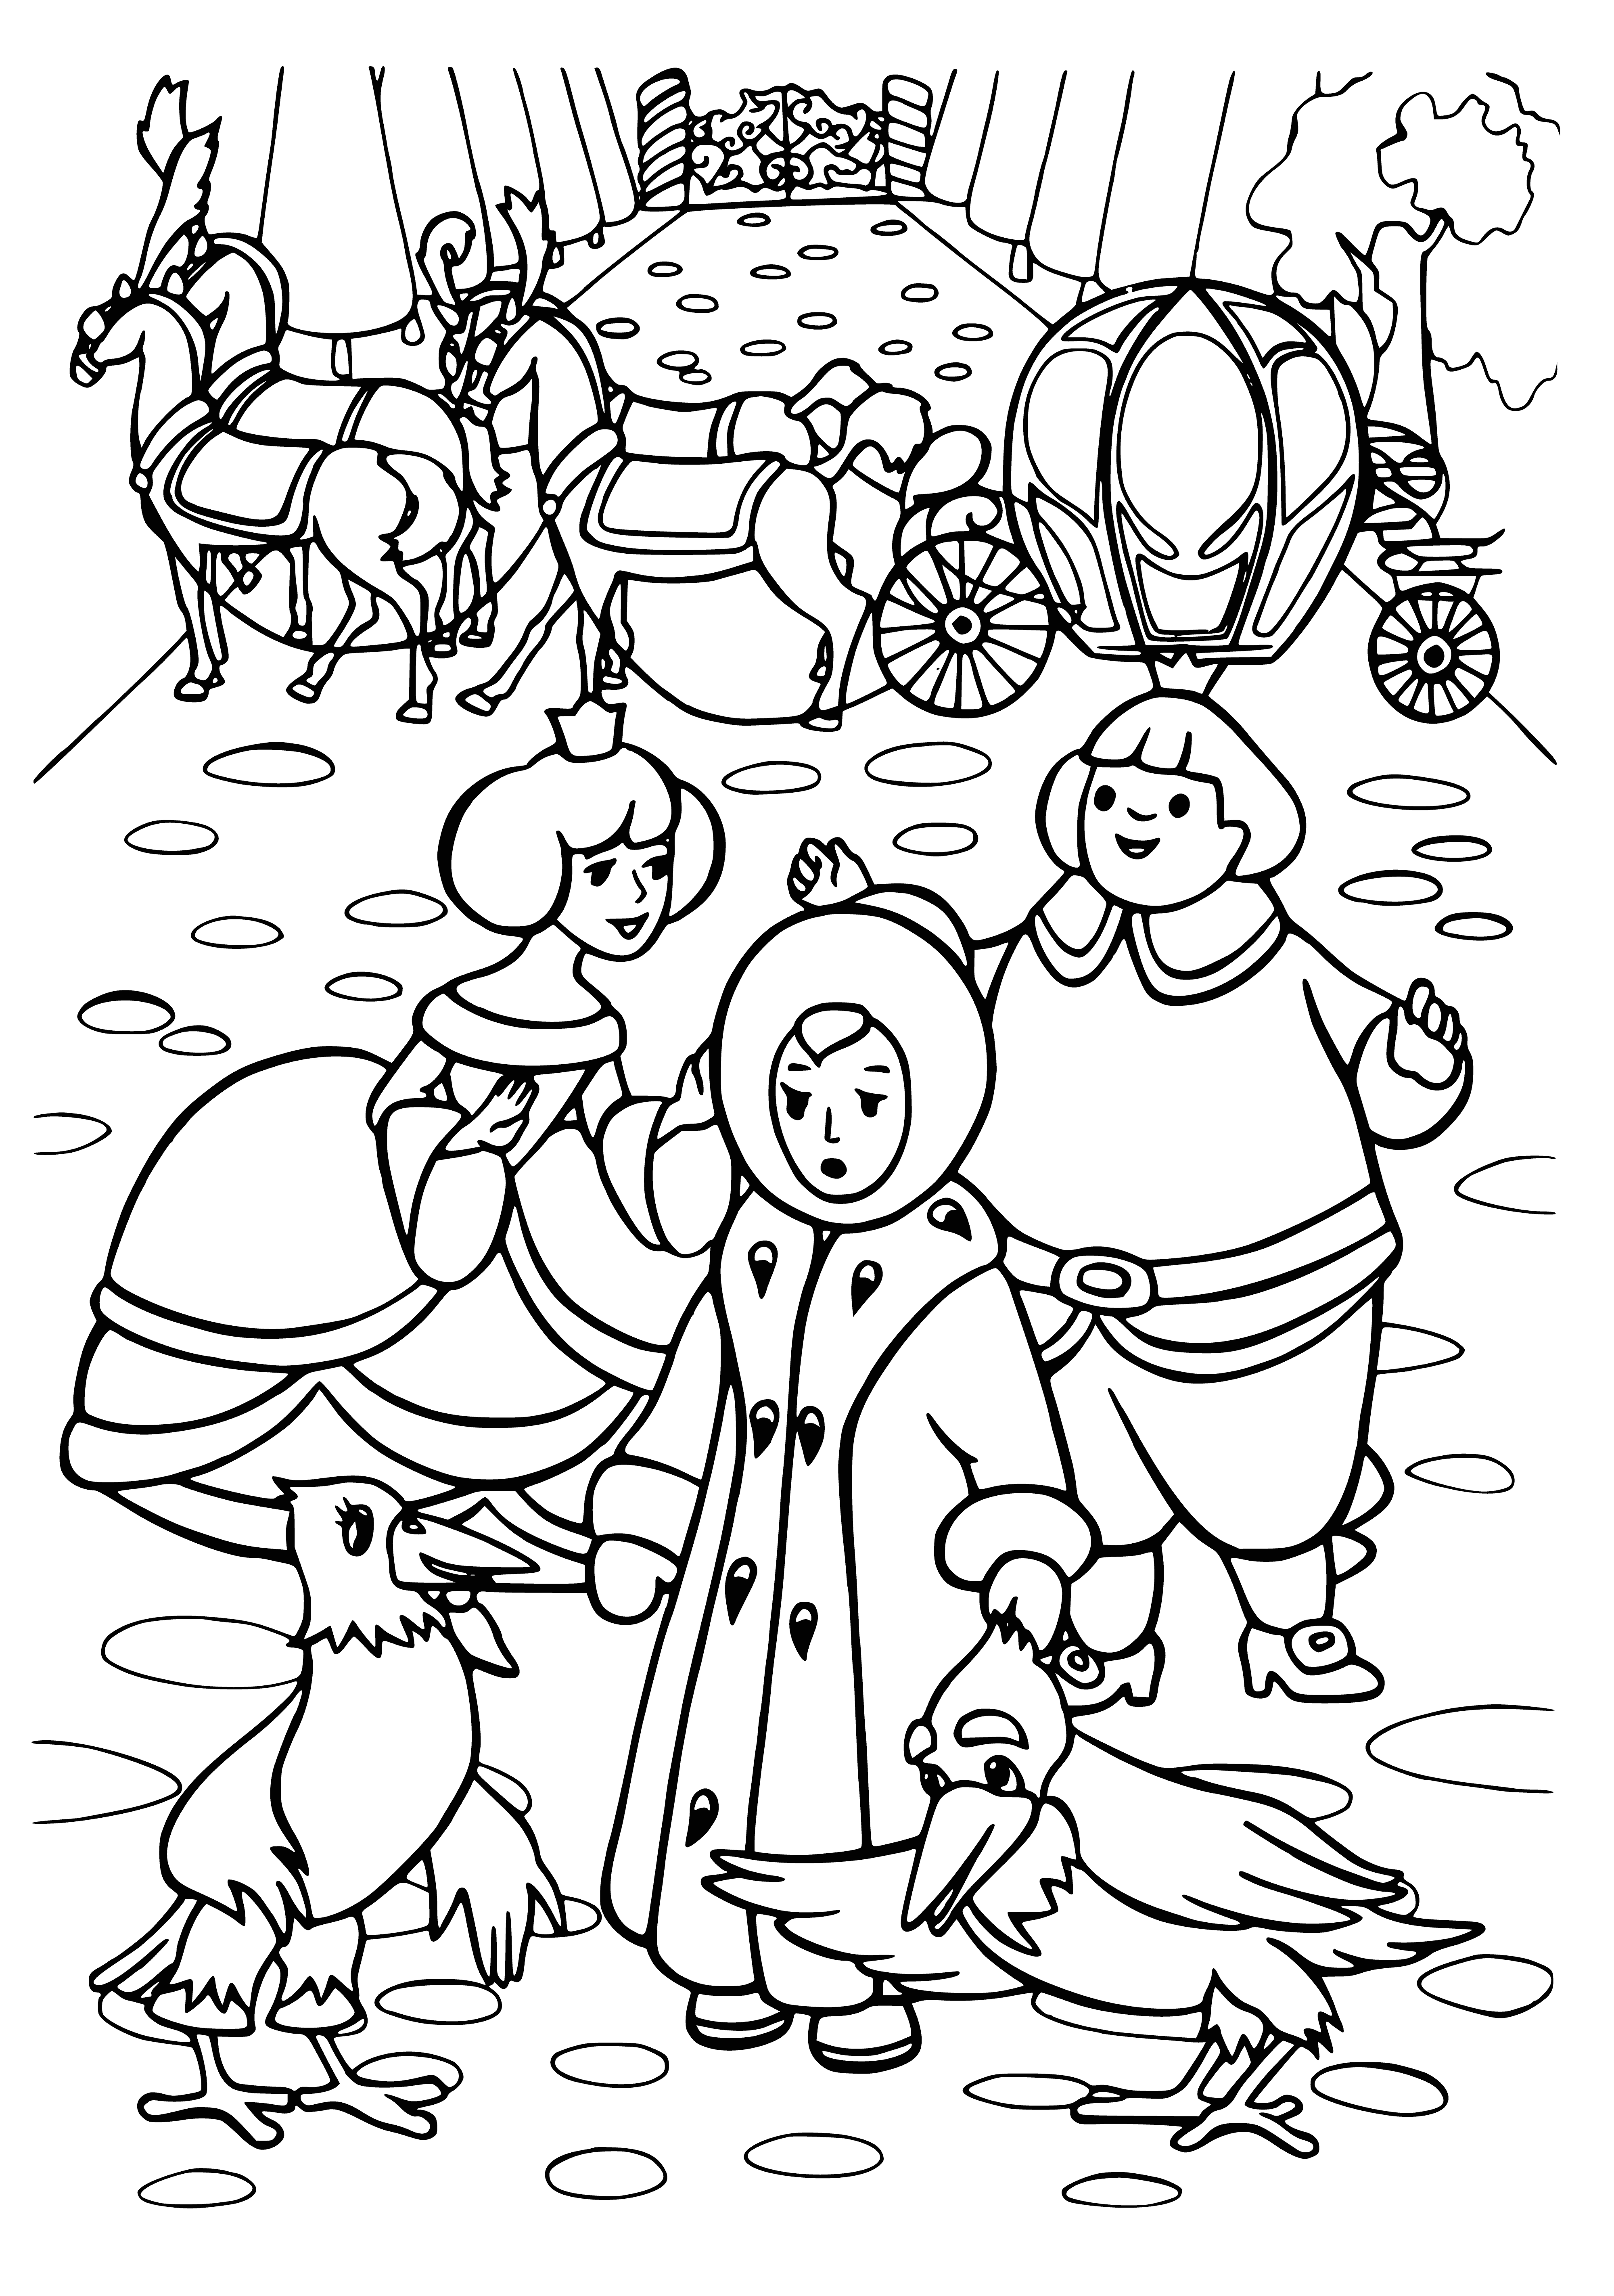 coloring page: Two kids admiring something in the sky, each holding a snowball. #WinterWonderland